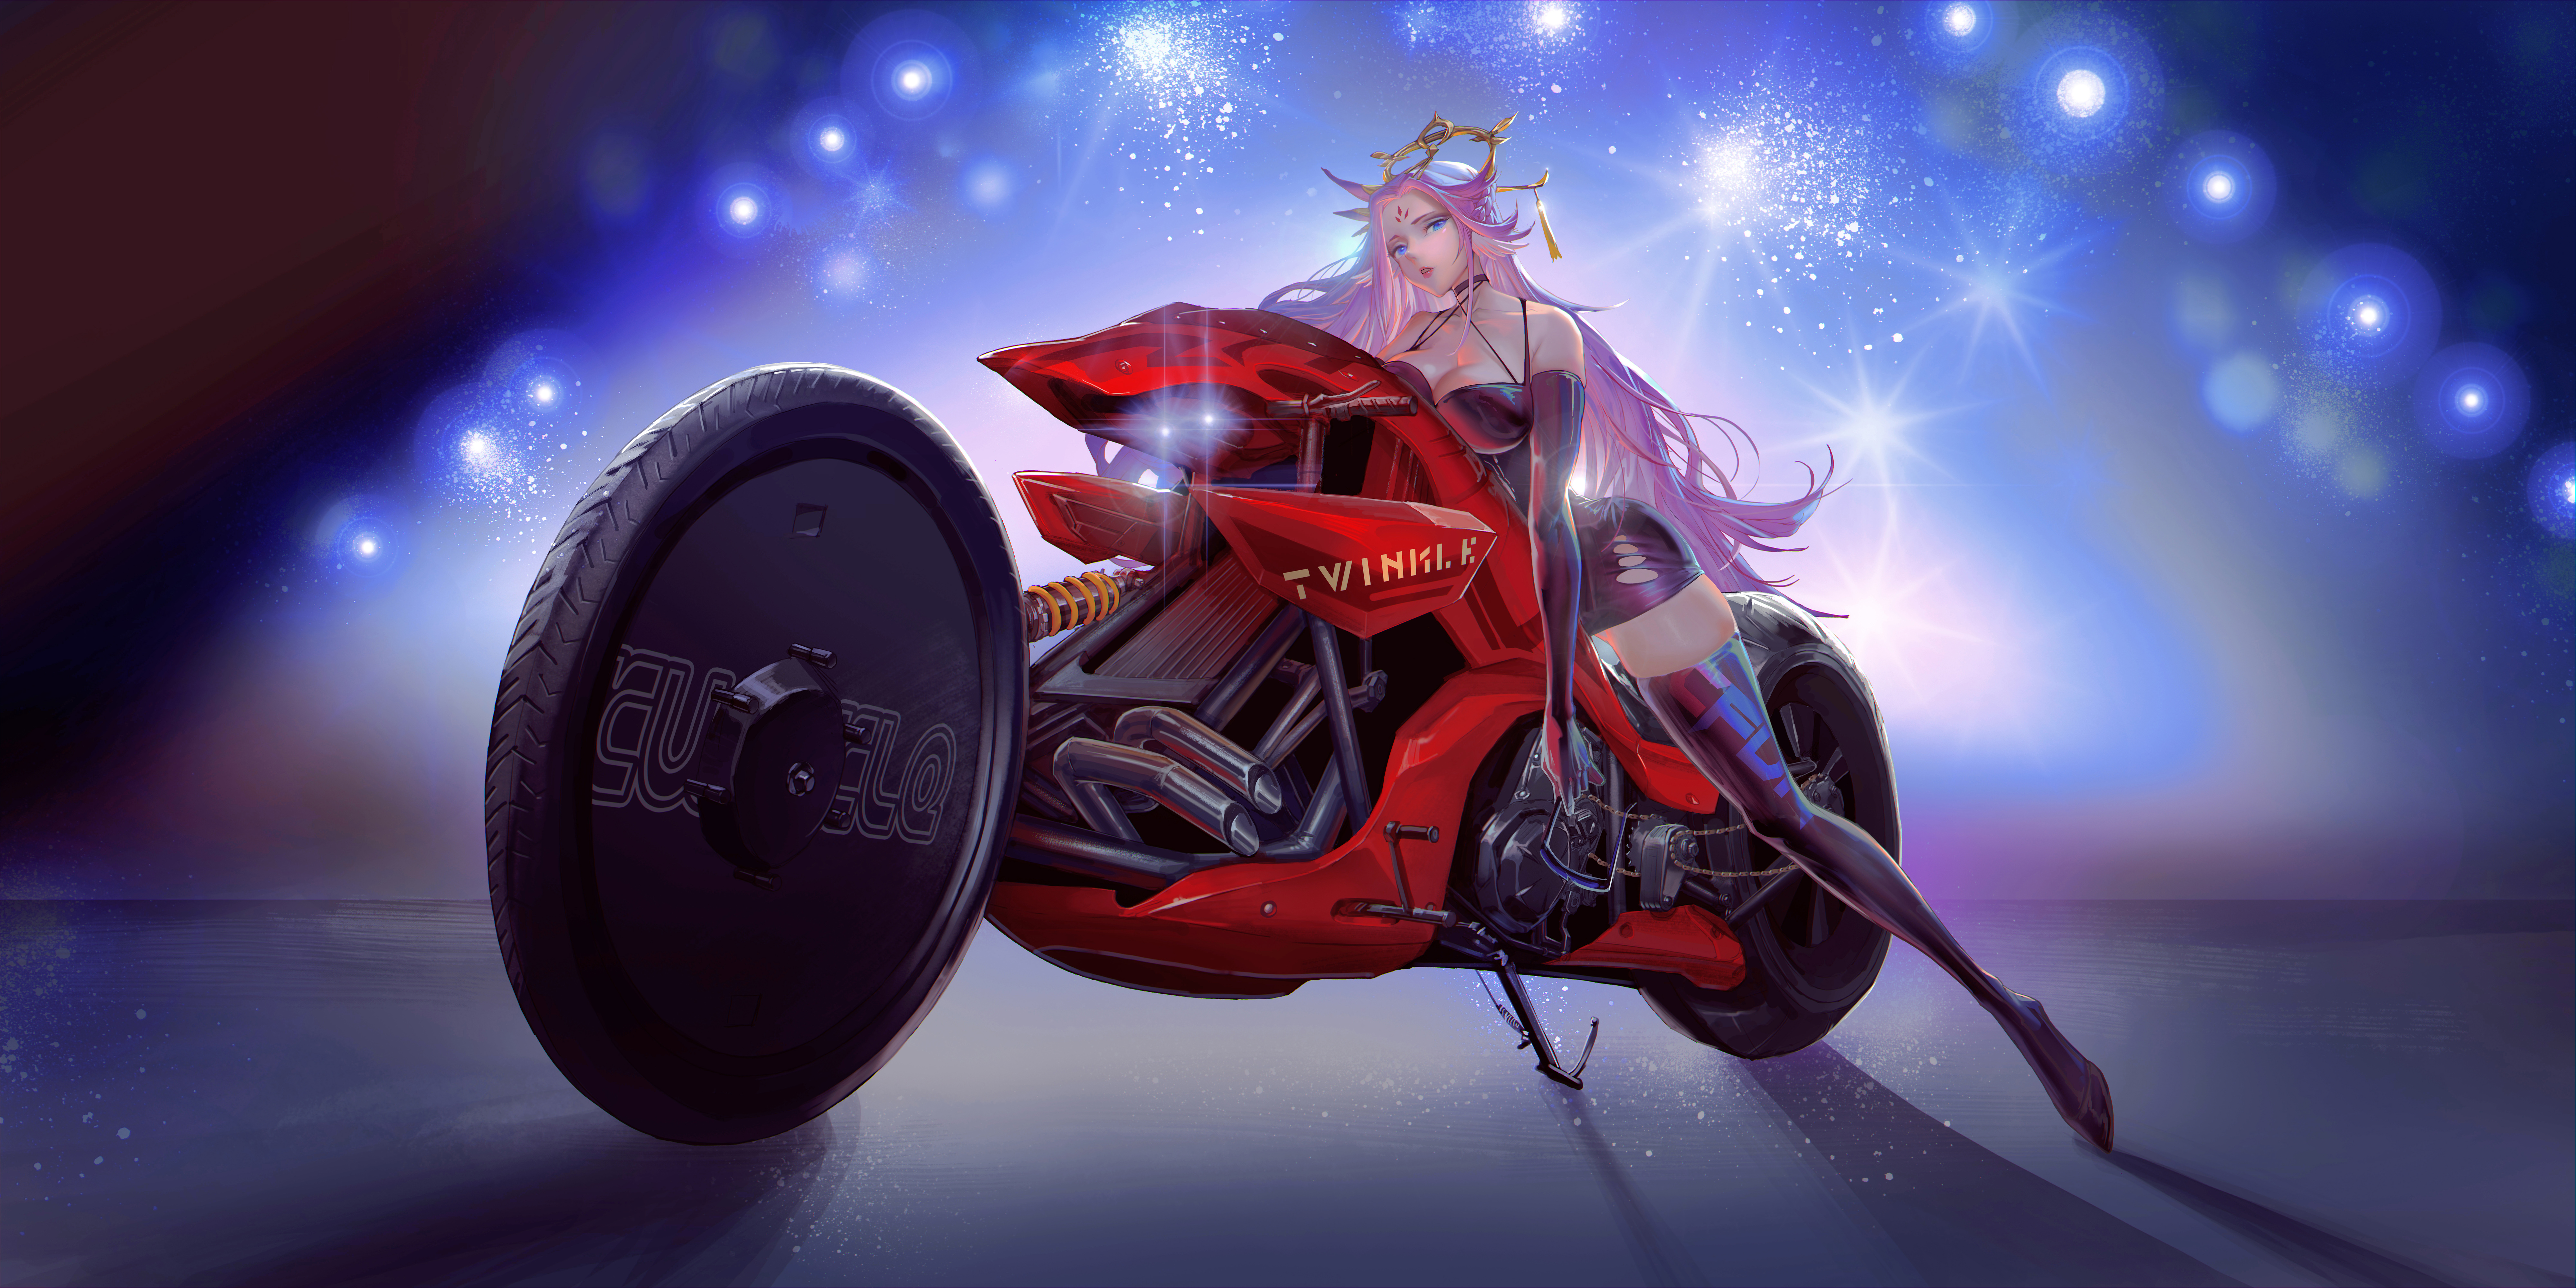 Lexica - Man on a futuristic motorcycle in anime akira style in a cyberpunk  city, motorcycle with three headlights, retro anime